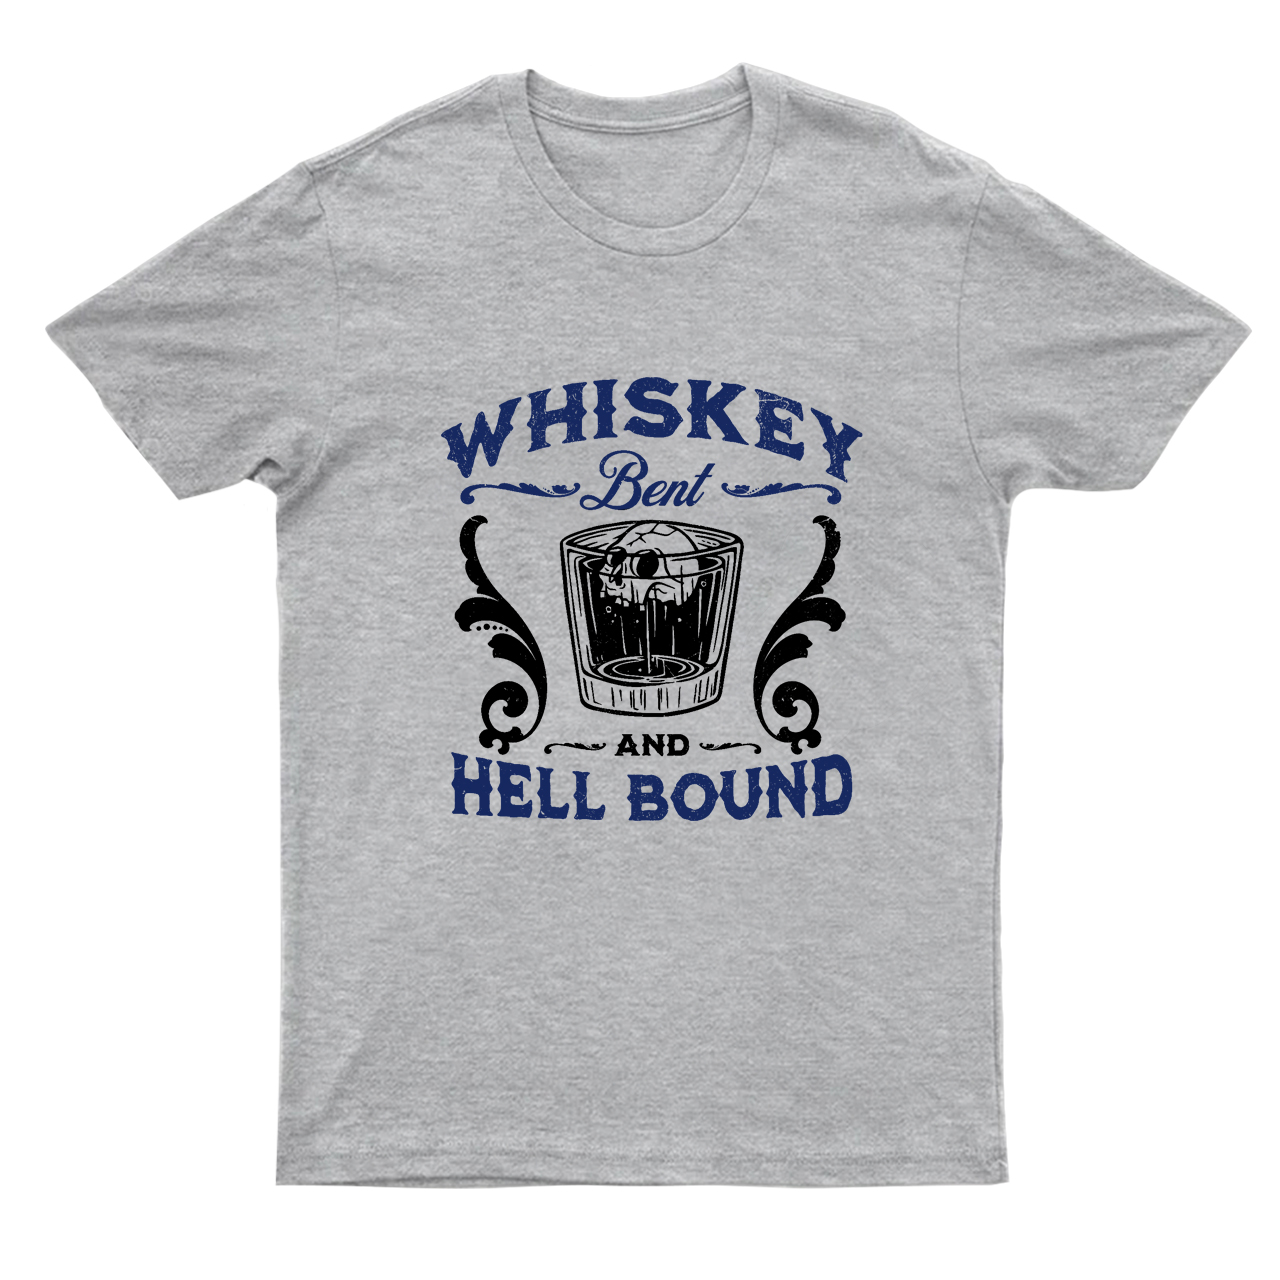 Whiskey Bent & Hell Bound T-Shirts